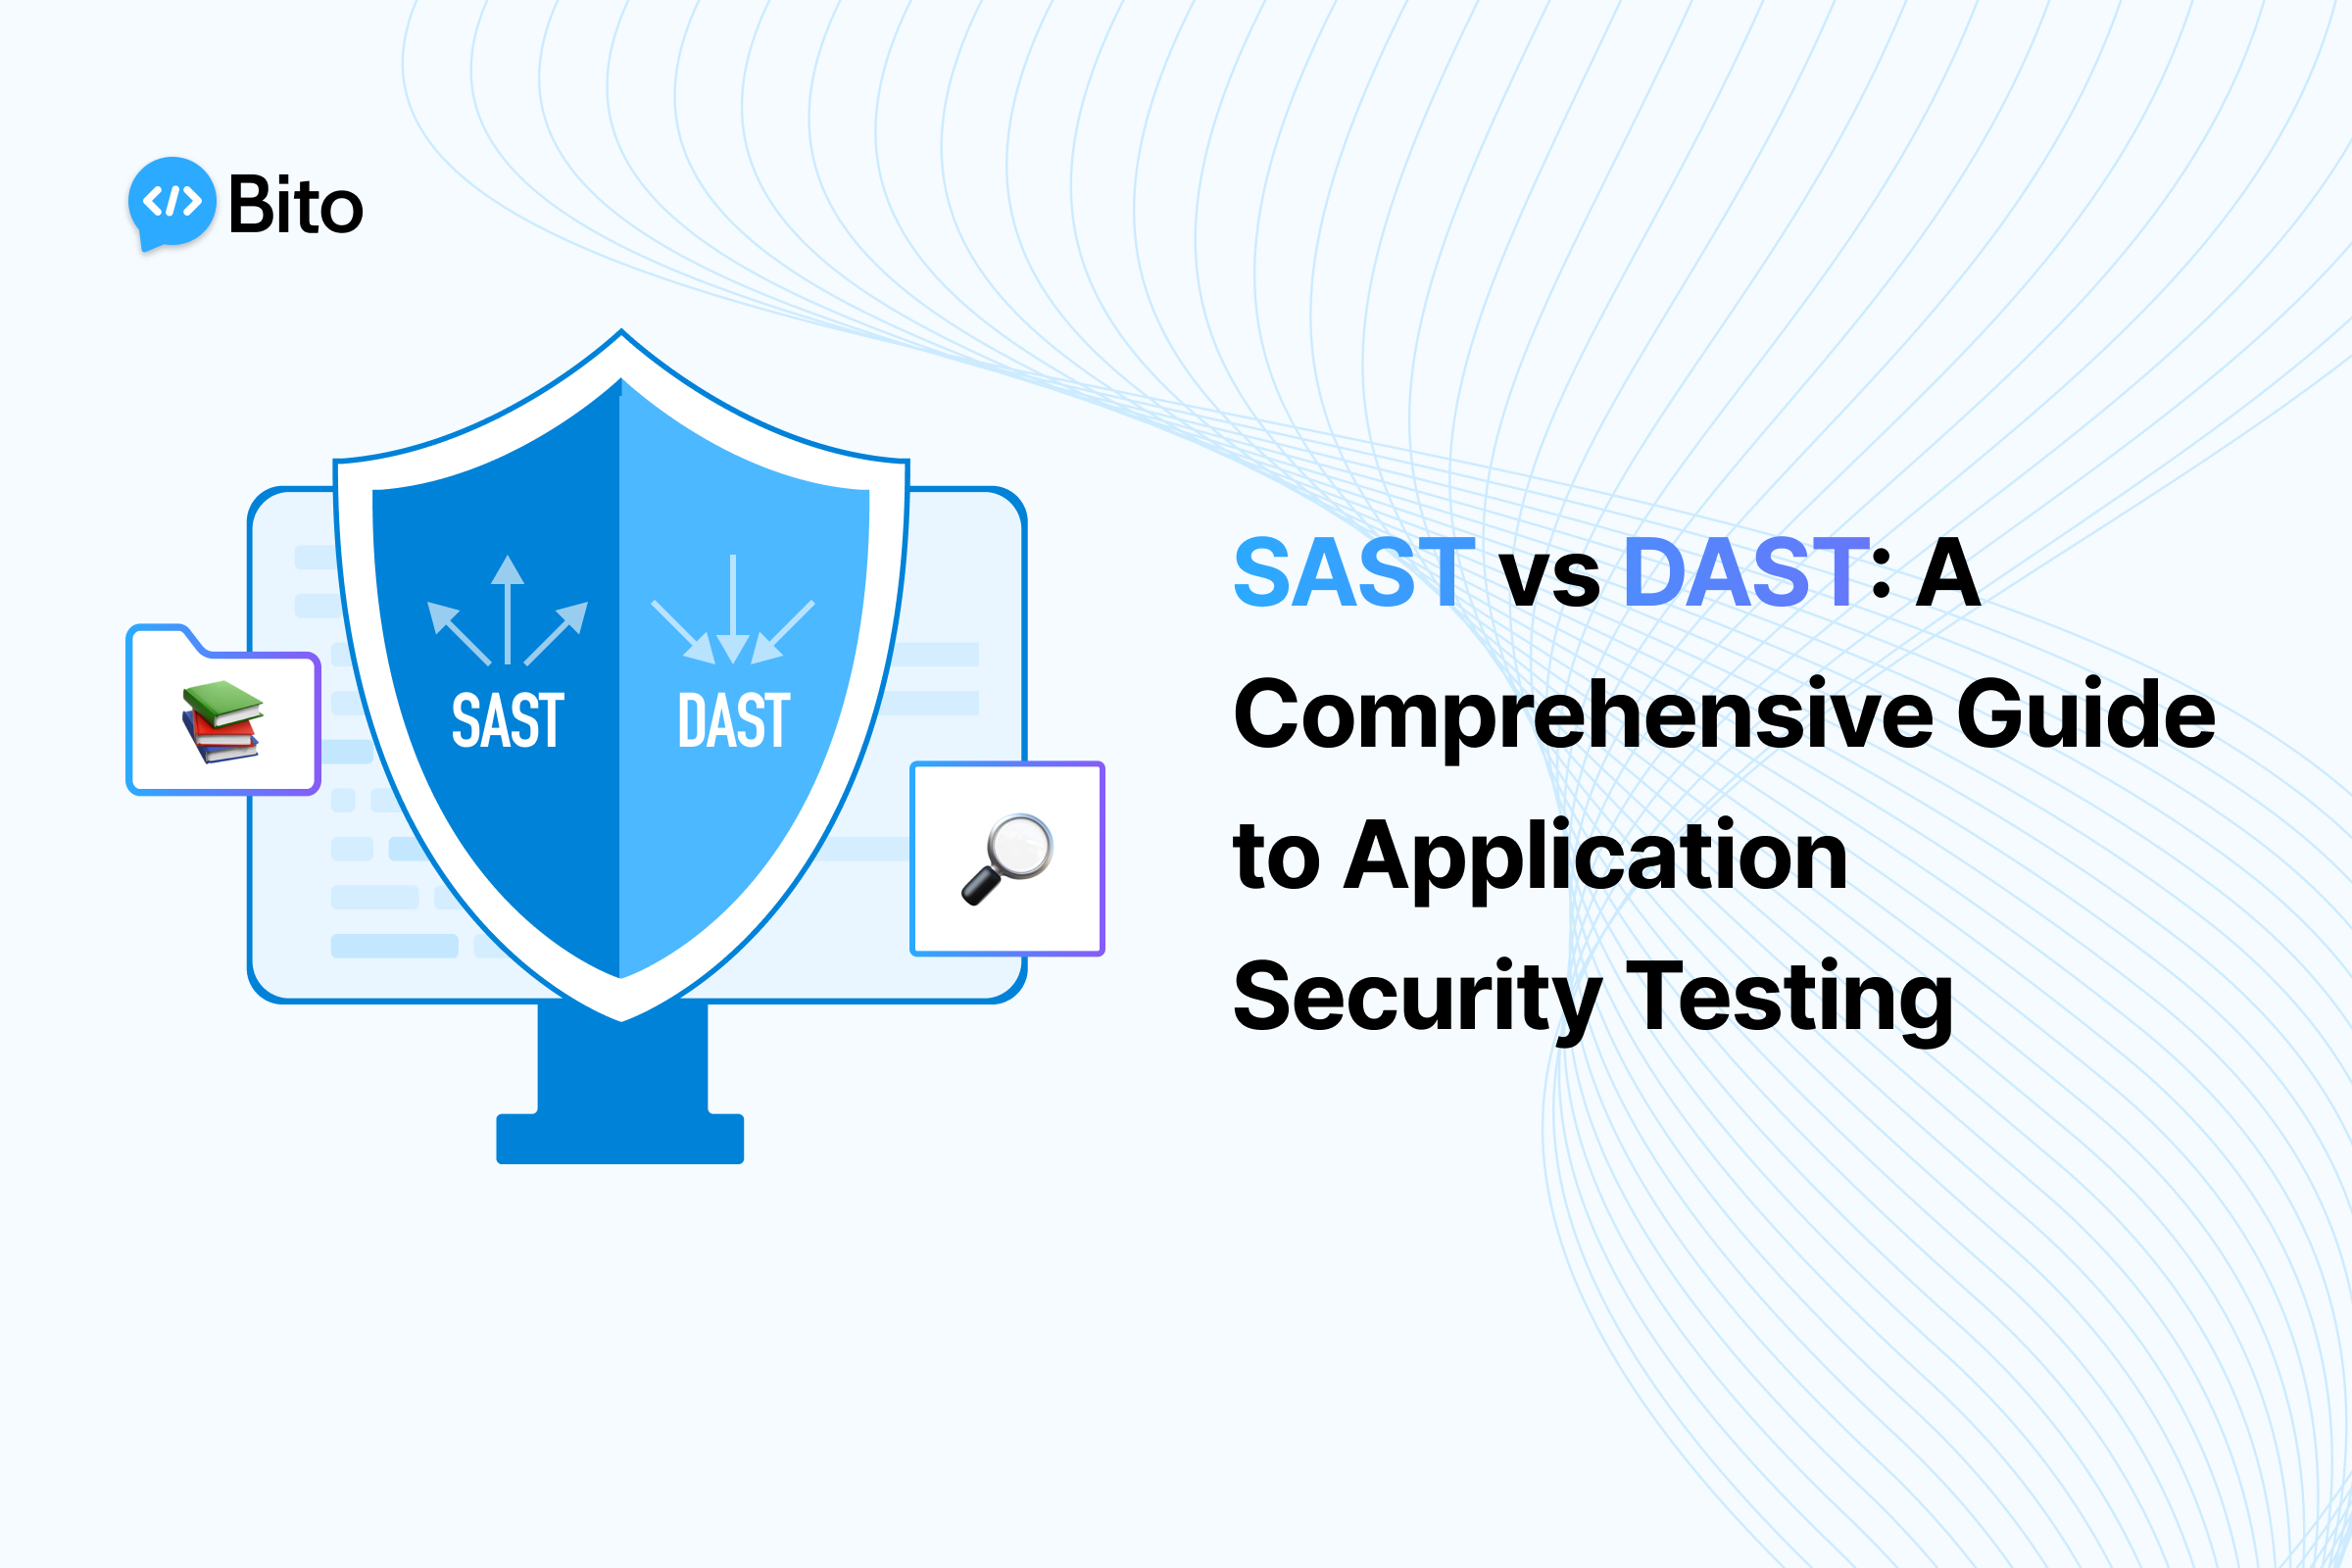 SAST vs DAST: A Comprehensive Guide to Application Security Testing